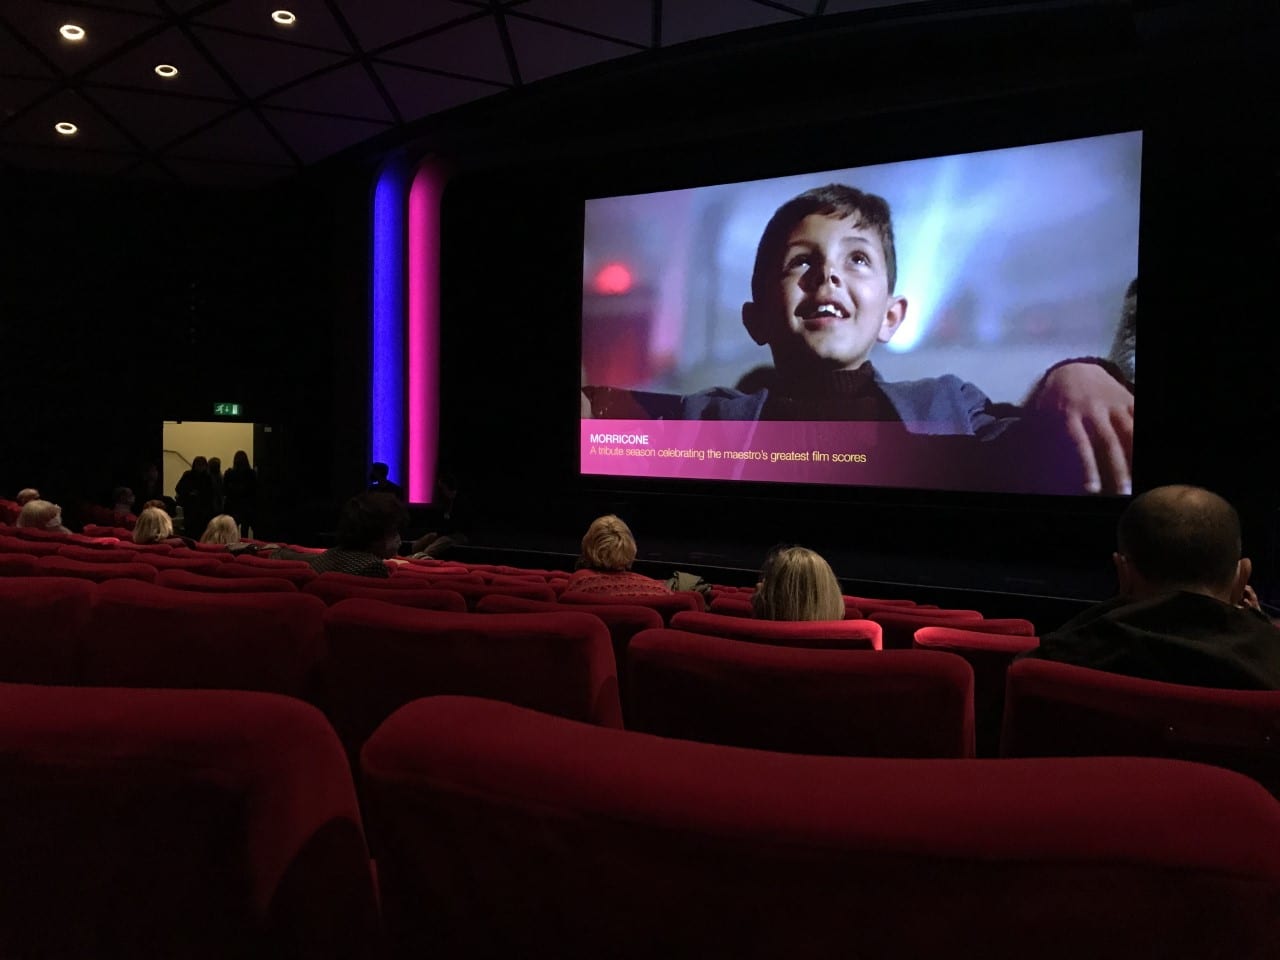 Photo taken by author of the socially distanced screening of Undine at the BFI Southbank